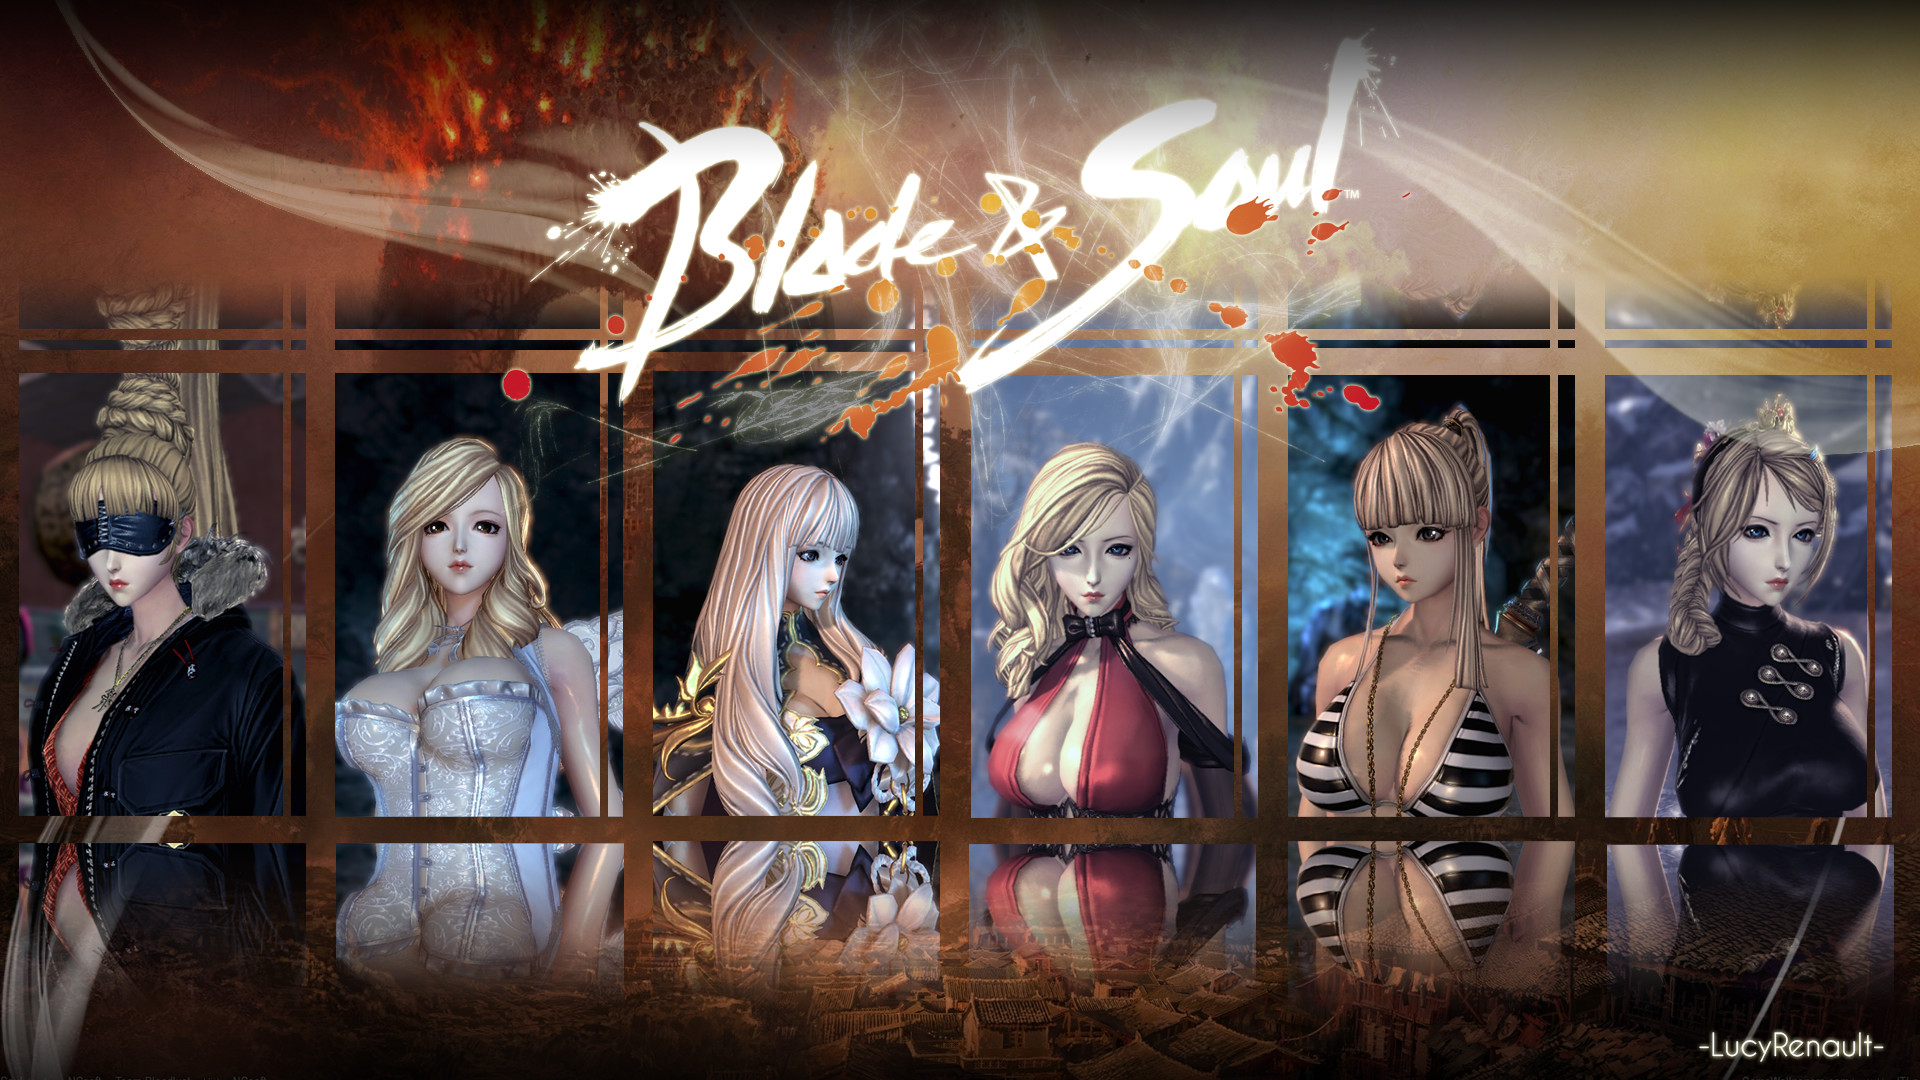 1920x1080 Blade and soul wallpaper